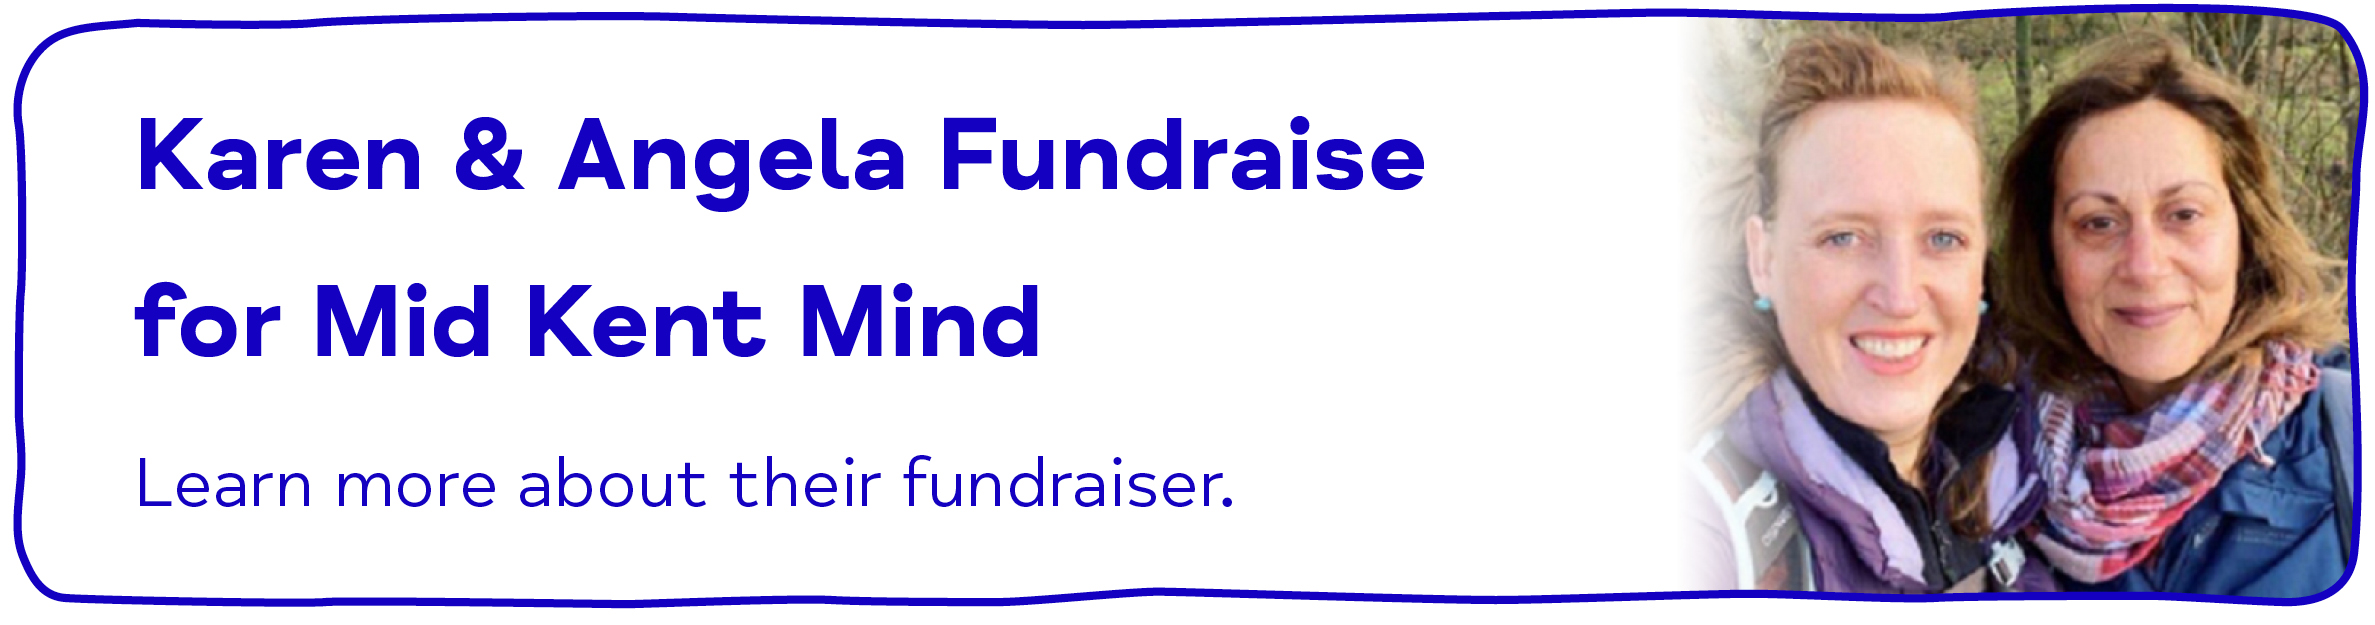 Karen & Angela Fundraise for Mid Kent Mind Learn more about their fundraiser.